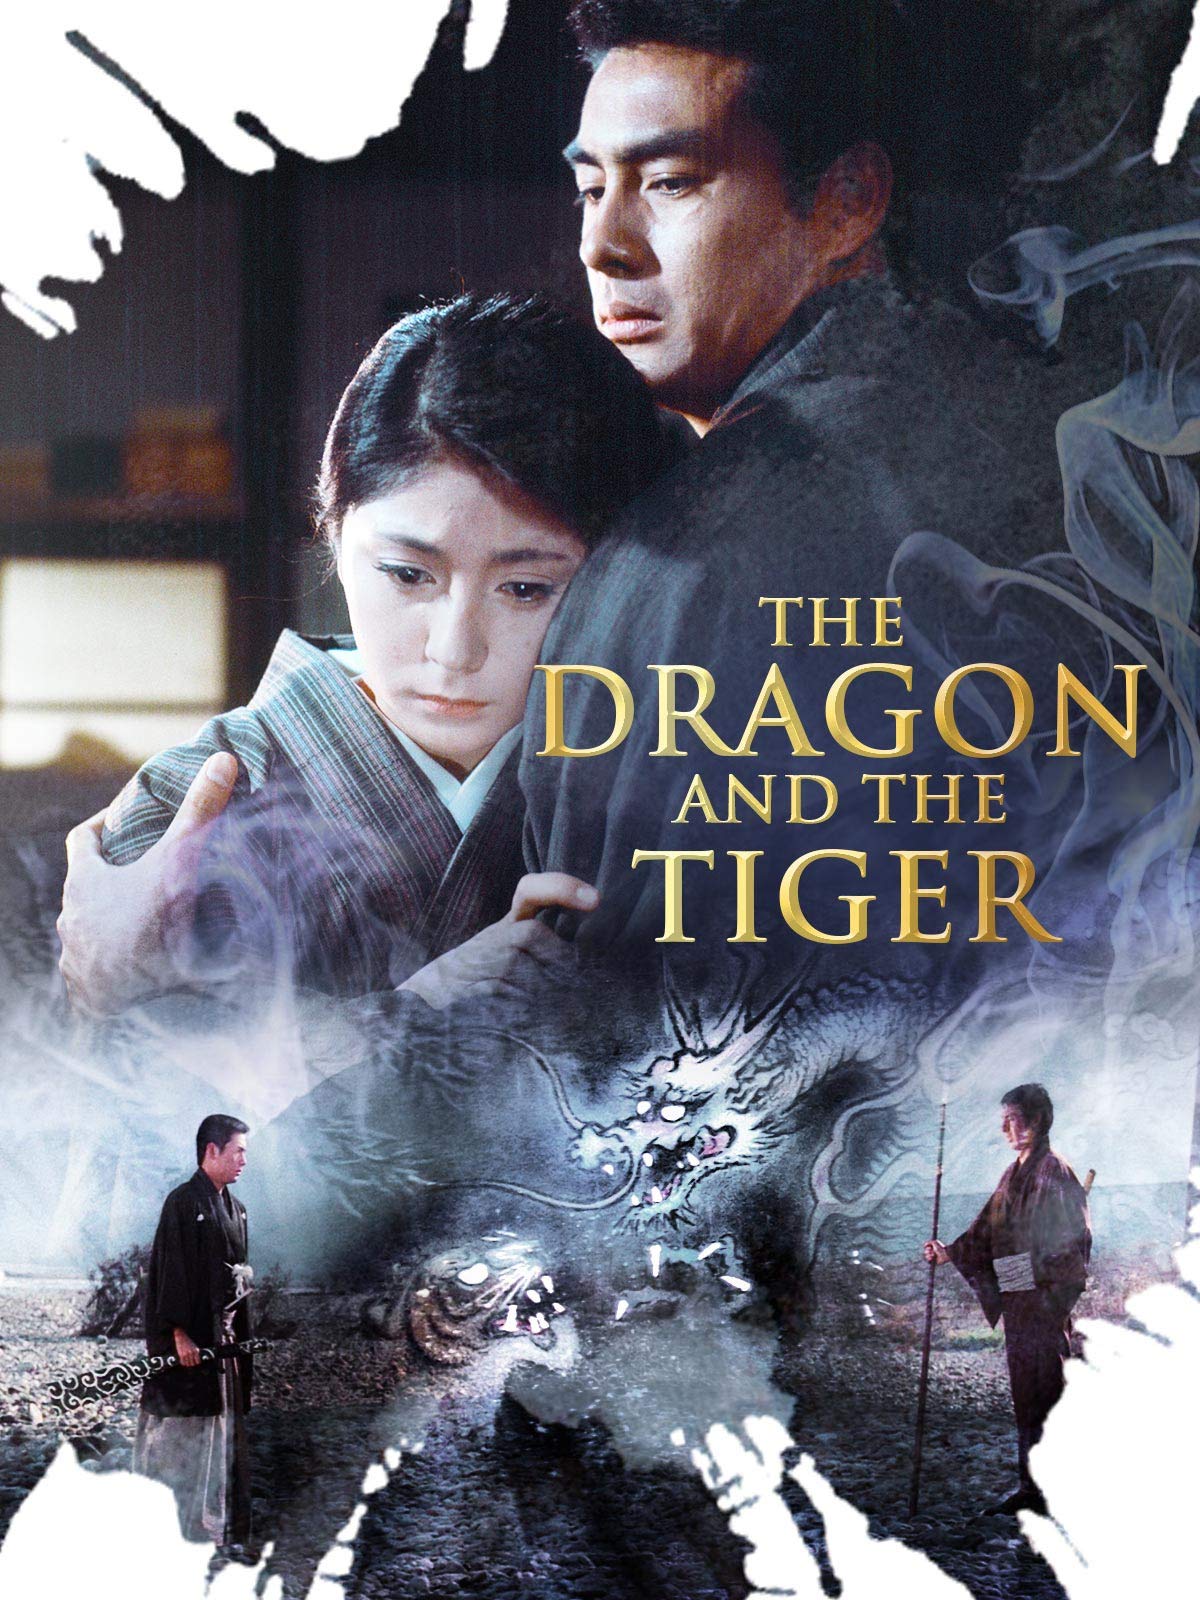 The Dragon and the Tiger (1966) Screenshot 3 